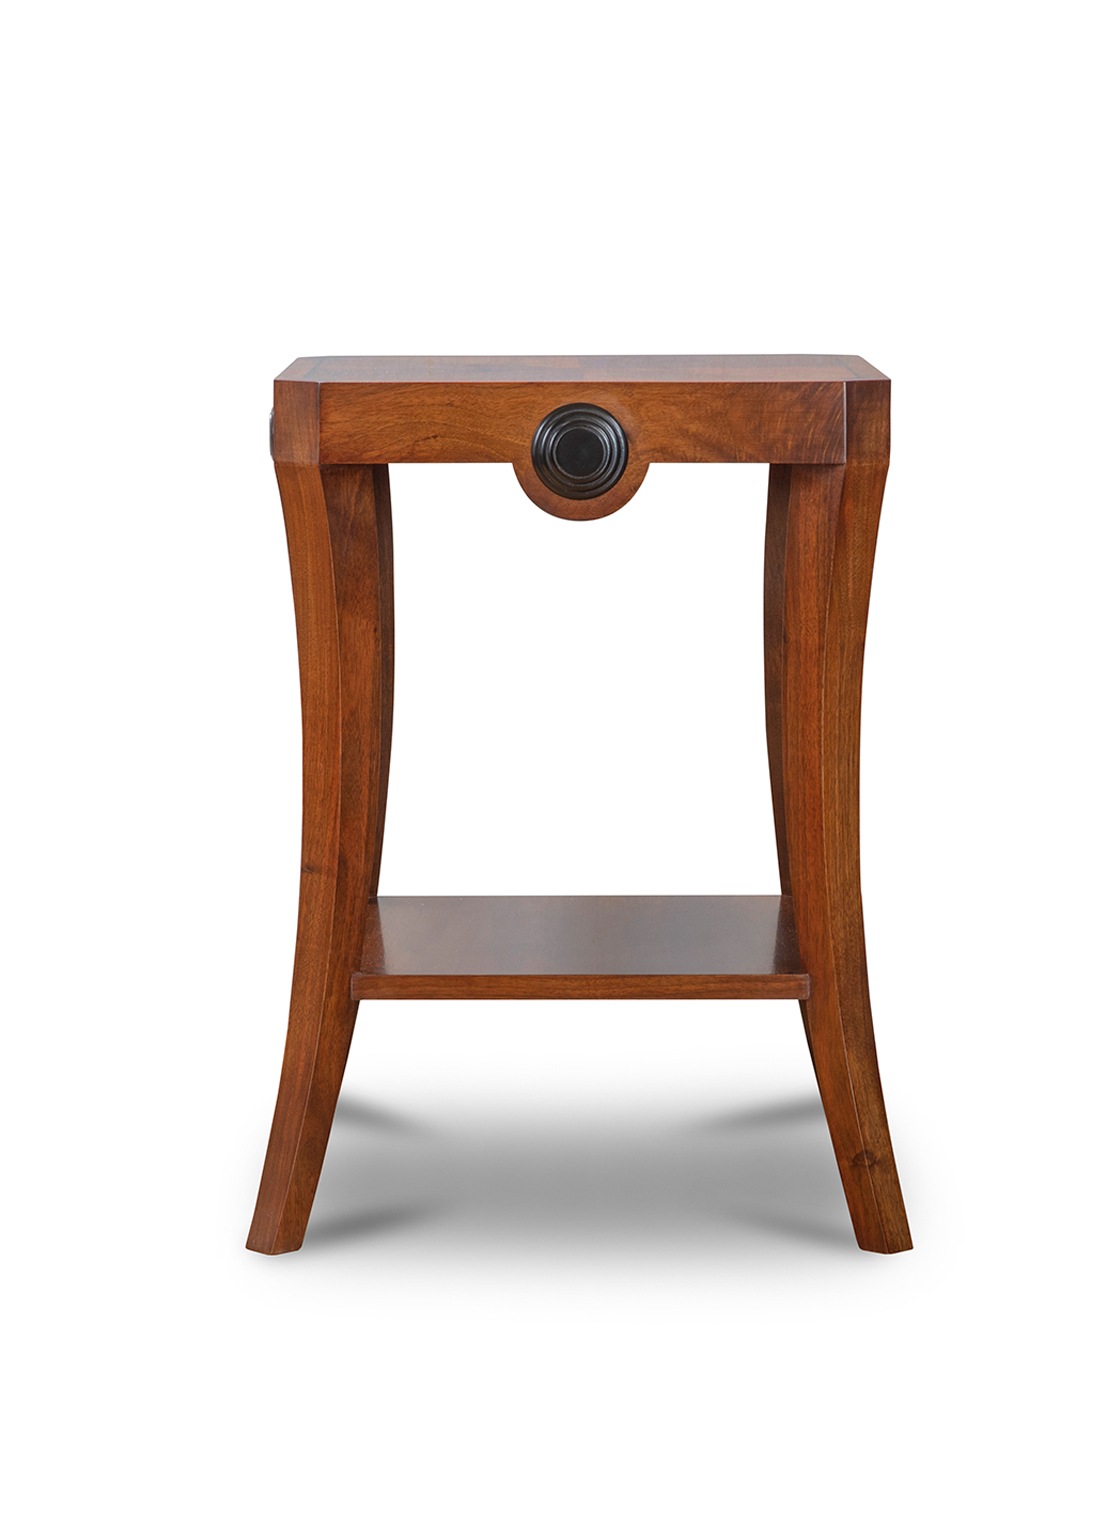 Duke side table in walnut and ebonised details - Beaumont & Fletcher